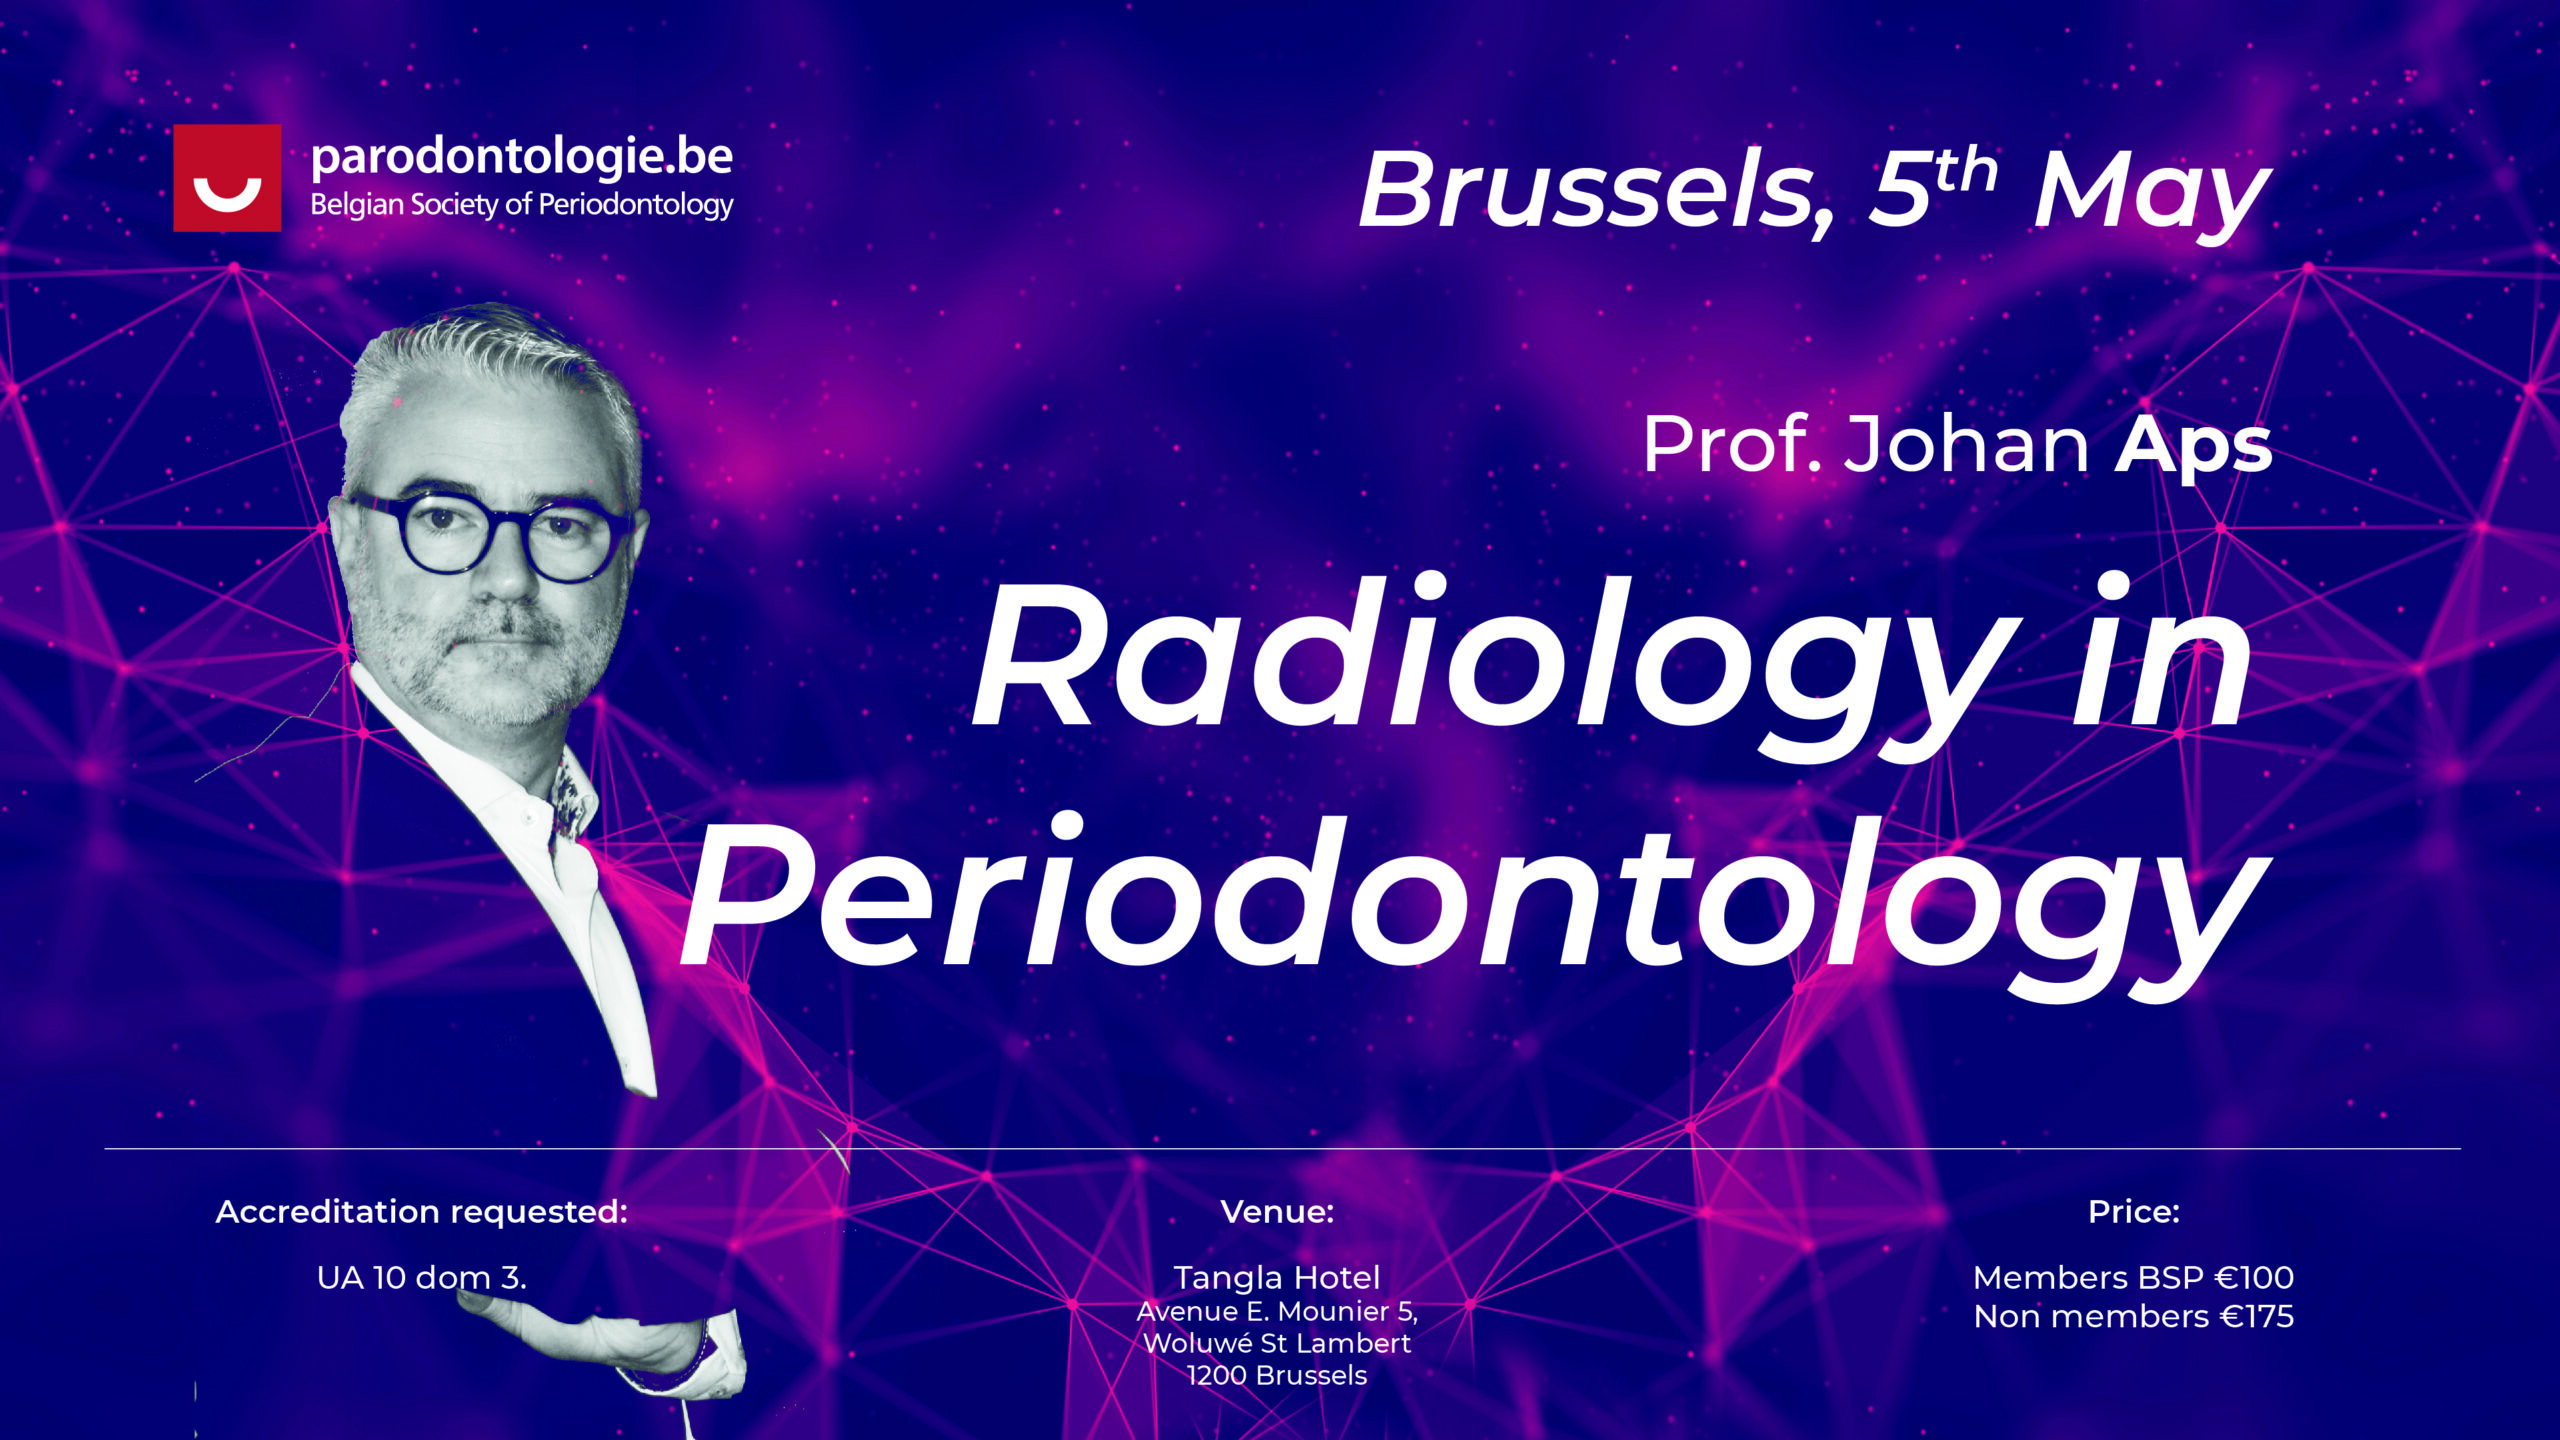 Radiology in Periodontology